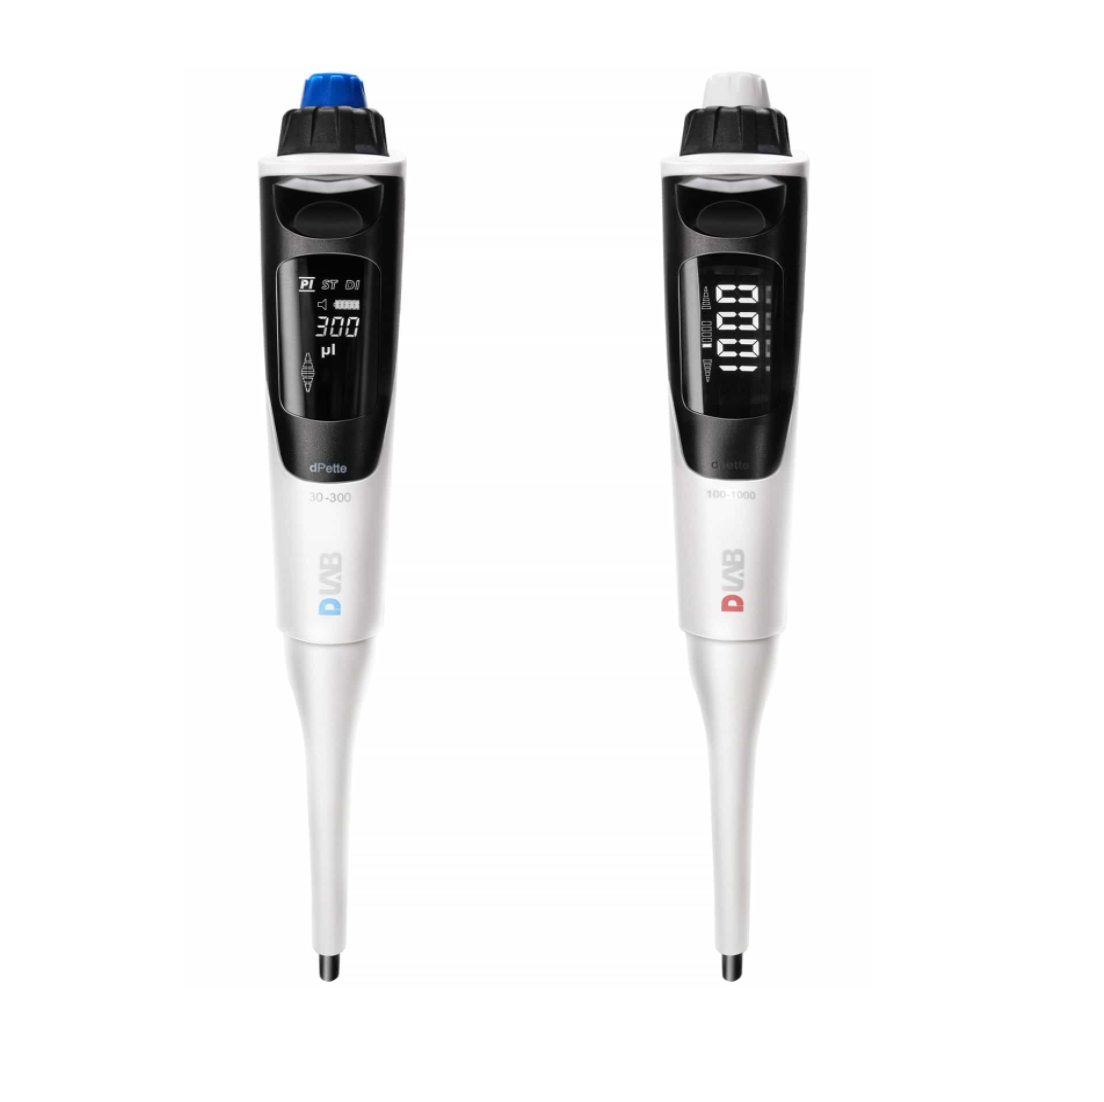 D-Lab™ dPette+, Multifunction Electronic pipettes, Single-channel Adjustable Volume, 30 - 300 μl